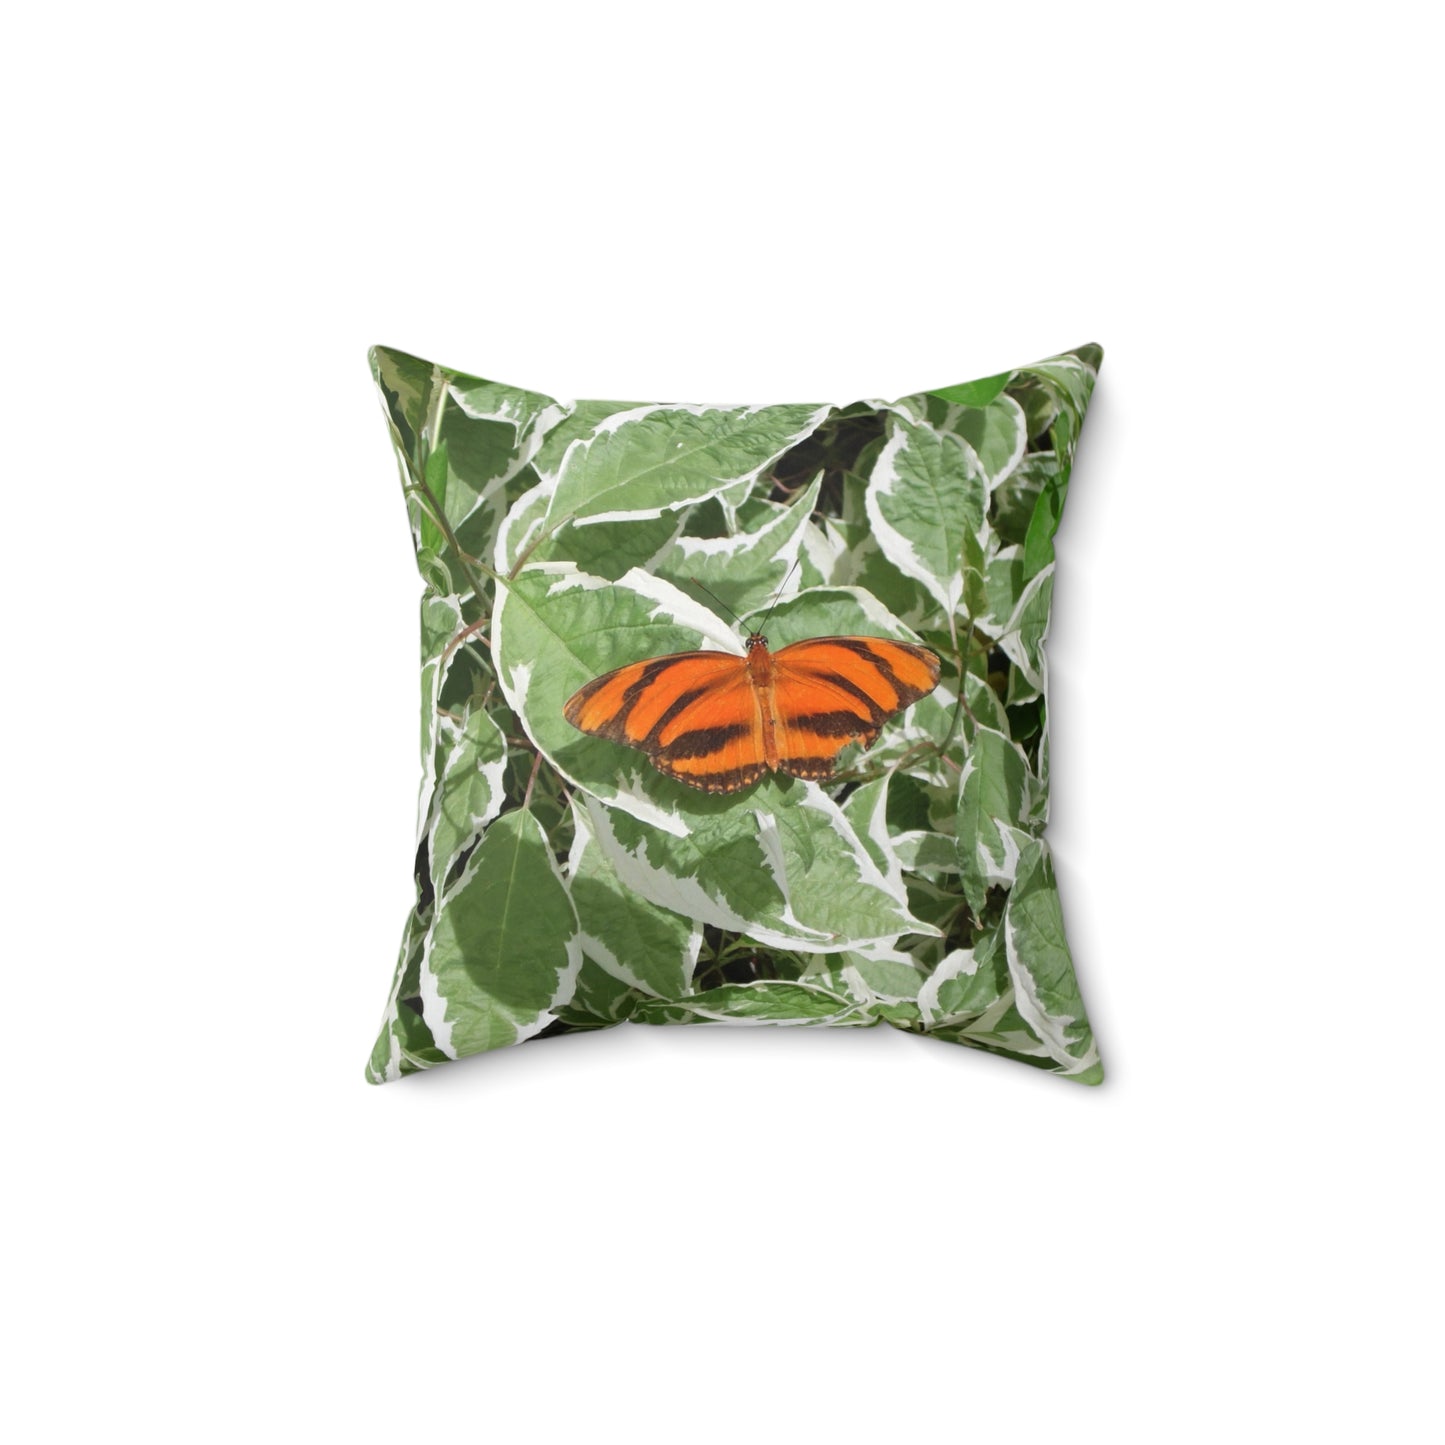 Leaves & Butterfly Spun Polyester Square Pillow